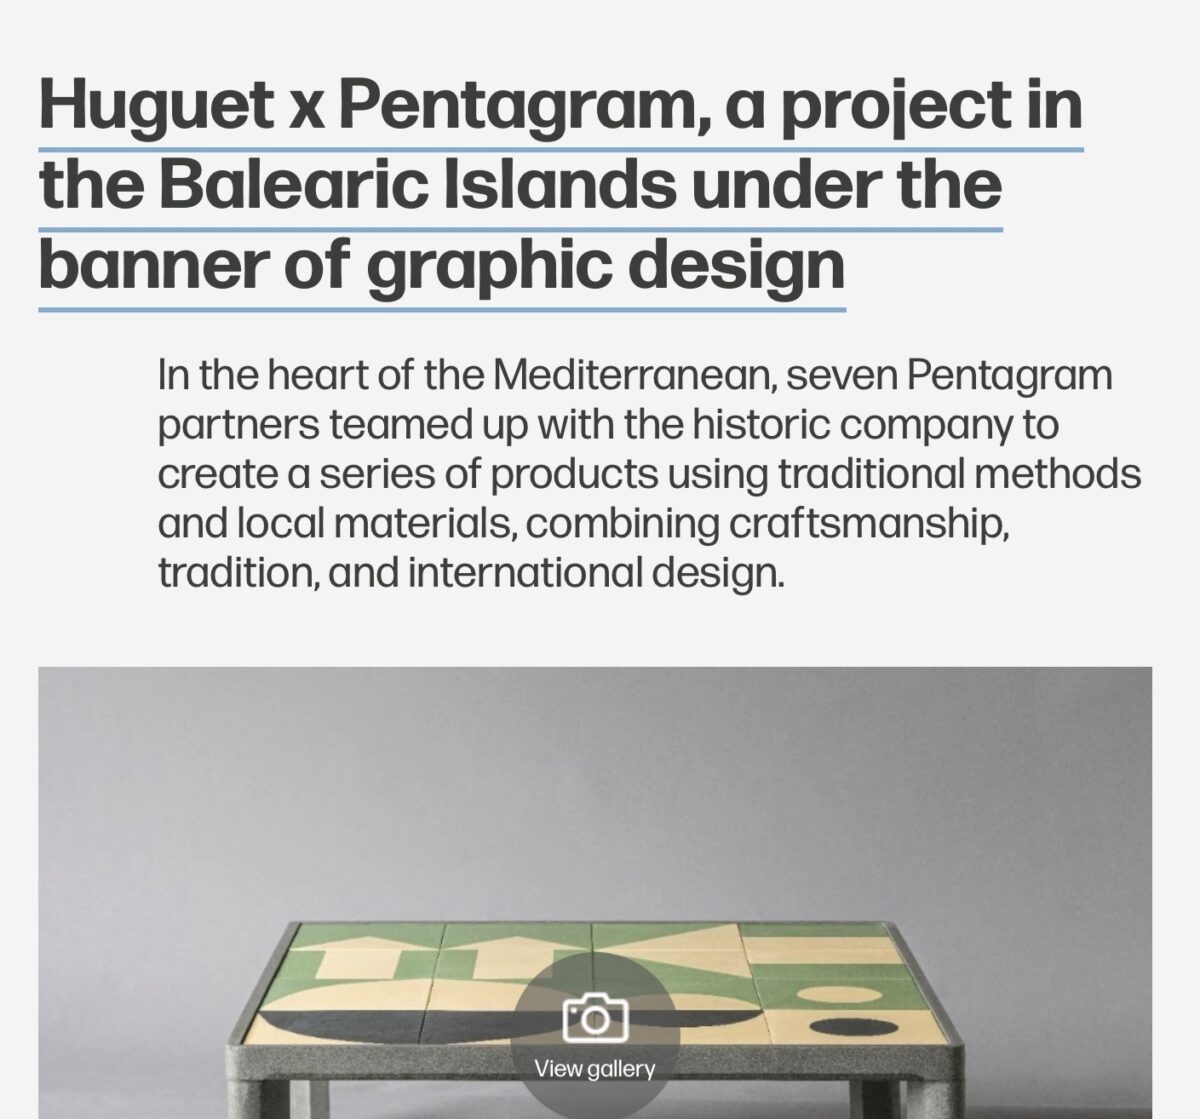 domus | Huguet x Pentagram, a project in the Balearic Islands under the banner of graphic design. 12/2022